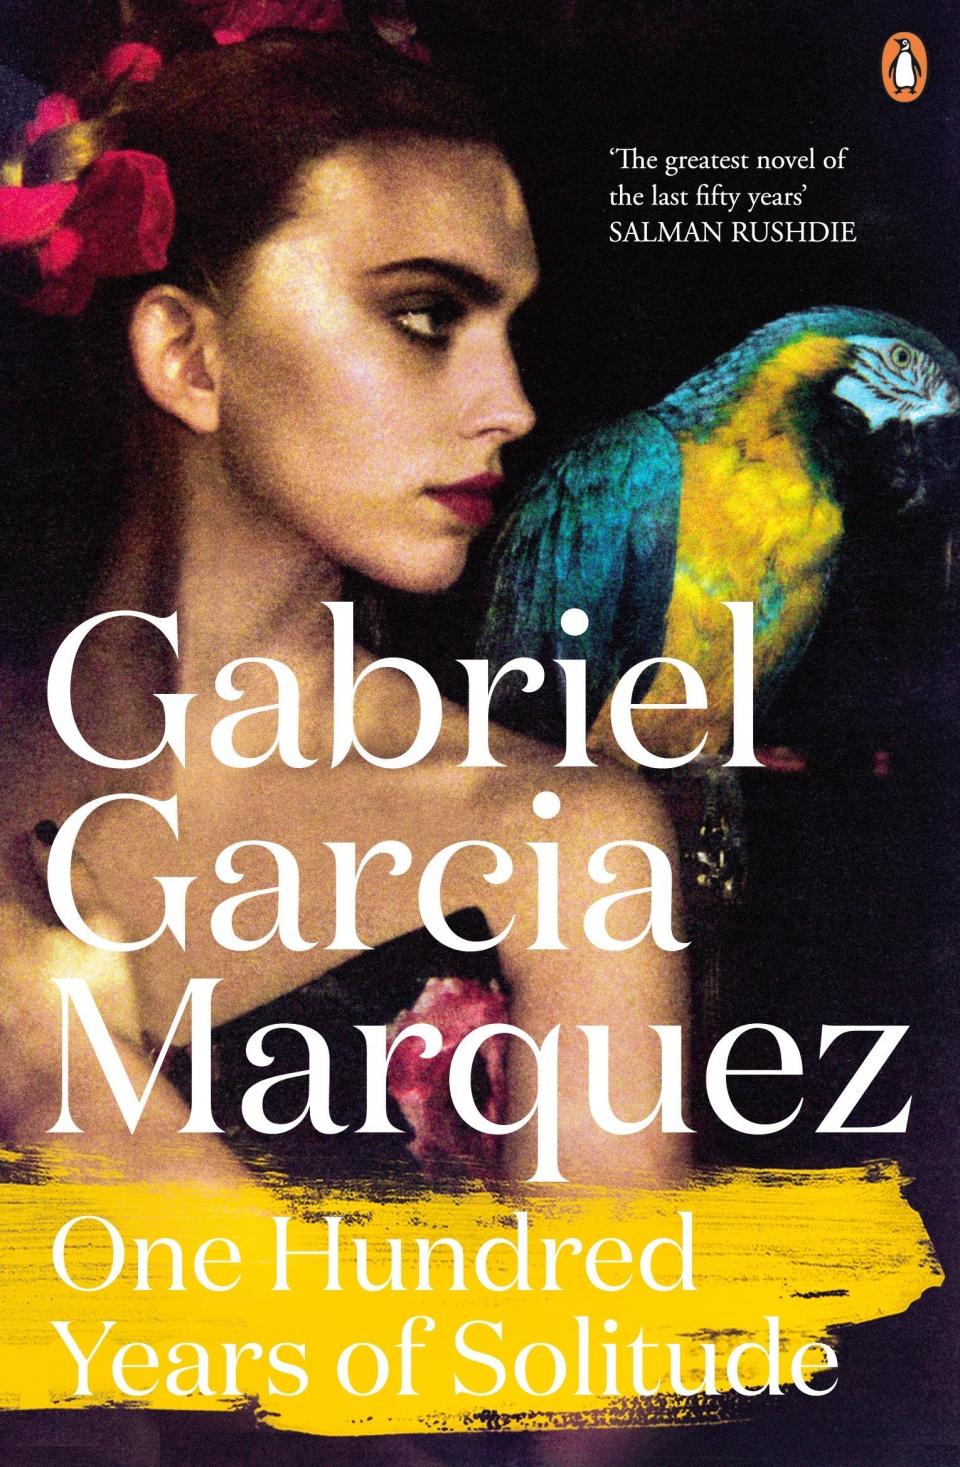 <i>"One Hundred Years of Solitude</i> by Gabriel Garcia Marquez&nbsp;exploded my heart and mind as only this devilishly evocative author could. In this book, I encountered magical realism for the first time, and it forever influenced my own creative style and my relationship to reality." -- <i>Antonia Blumberg, Religion Associate Editor<br /><br /></i>"I didn't realize writing could look like that even in translation. I didn't realize how much magic and reality blended naturally and it made me more aware of the 'magic' lurking in our own capabilities."<i>&nbsp;-- Nadya Agrawal, Editorial Fellow&nbsp;</i><br /><br />Image via <a href="http://www.amazon.com/Hundred-Years-Solitude-Marquez-2014-ebook/dp/B00HVPSXNS">Amazon</a>